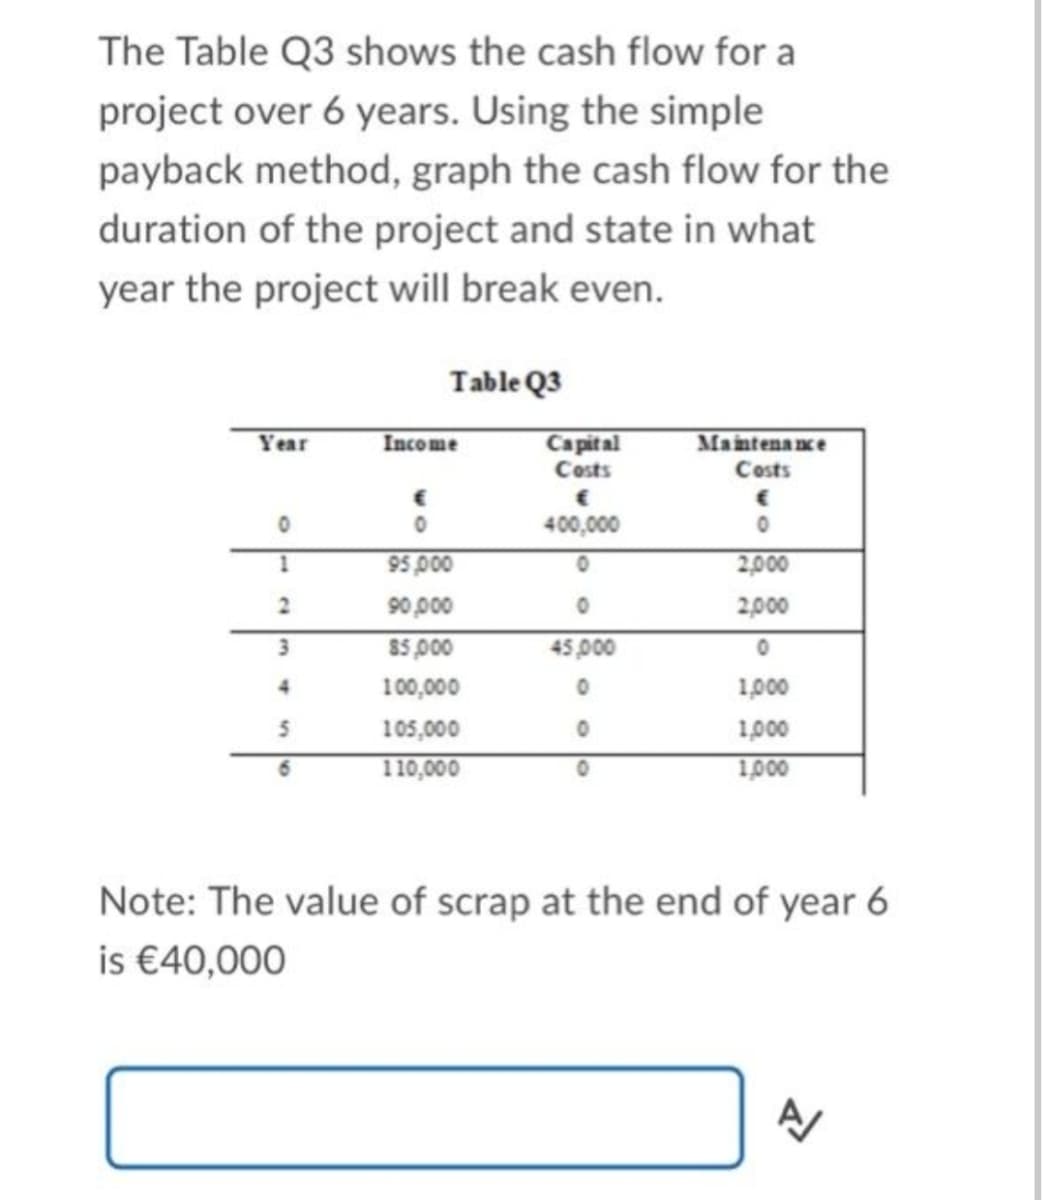 The Table Q3 shows the cash flow for a
project over 6 years. Using the simple
payback method, graph the cash flow for the
duration of the project and state in what
year the project will break even.
Table Q3
Year
Income
Ca pital
Costs
Maintena nce
Costs
400,000
1
95 p00
2,000
2.
90,000
2,000
3.
$5,000
45,000
4.
100,000
1,000
105,000
1,000
110,000
1,000
Note: The value of scrap at the end of year 6
is €40,000
